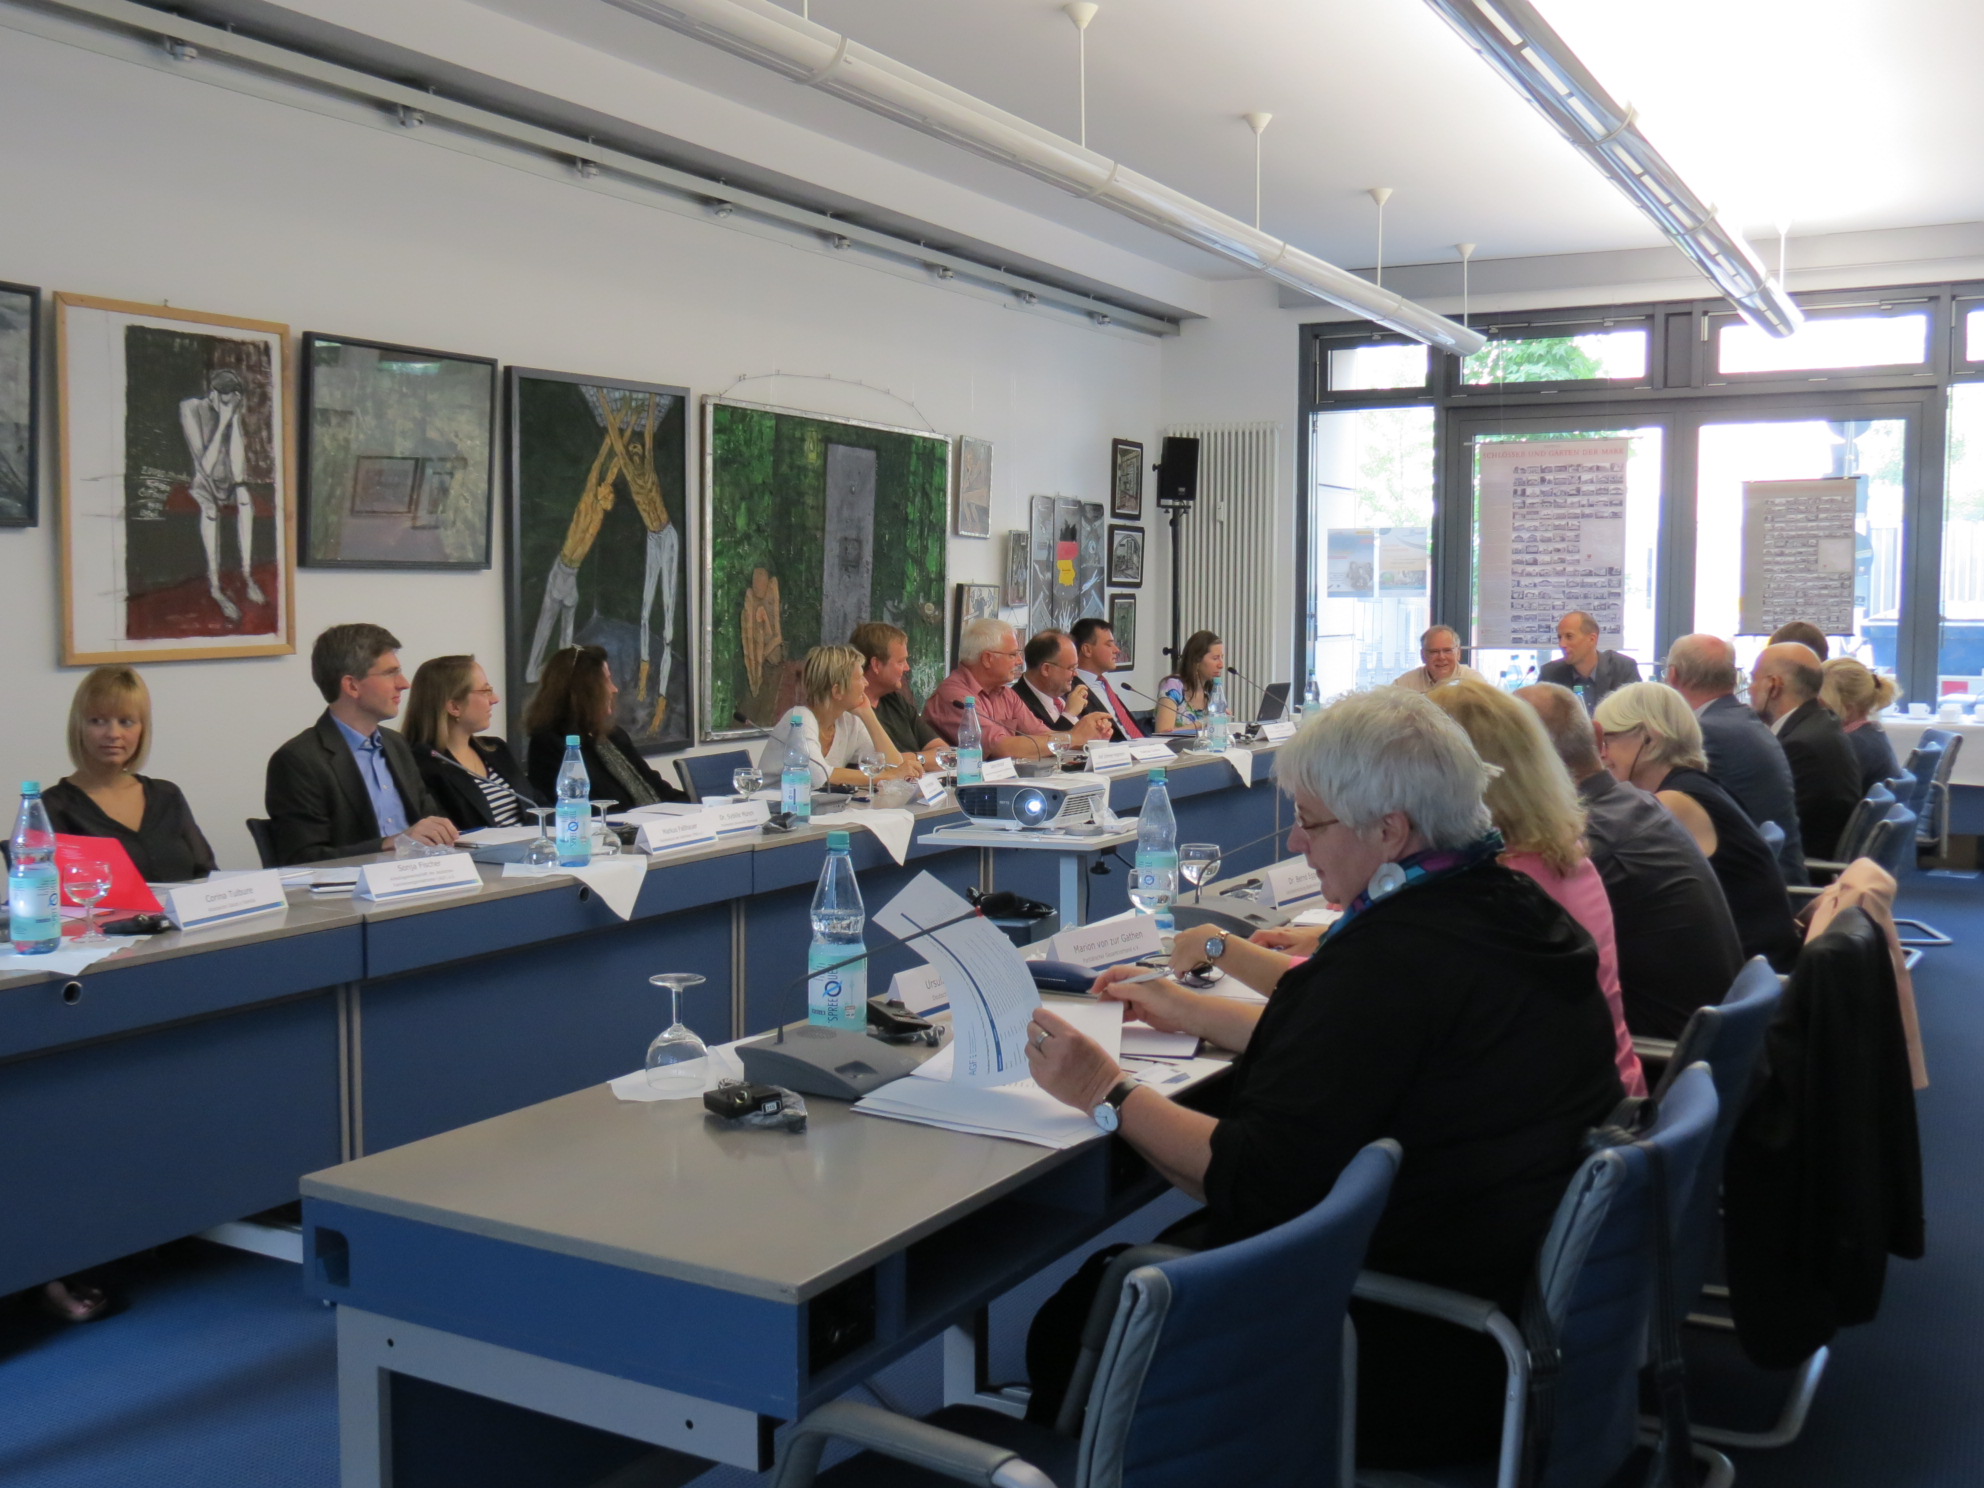 30.08.2013: Expert meeting on inclusion and housing